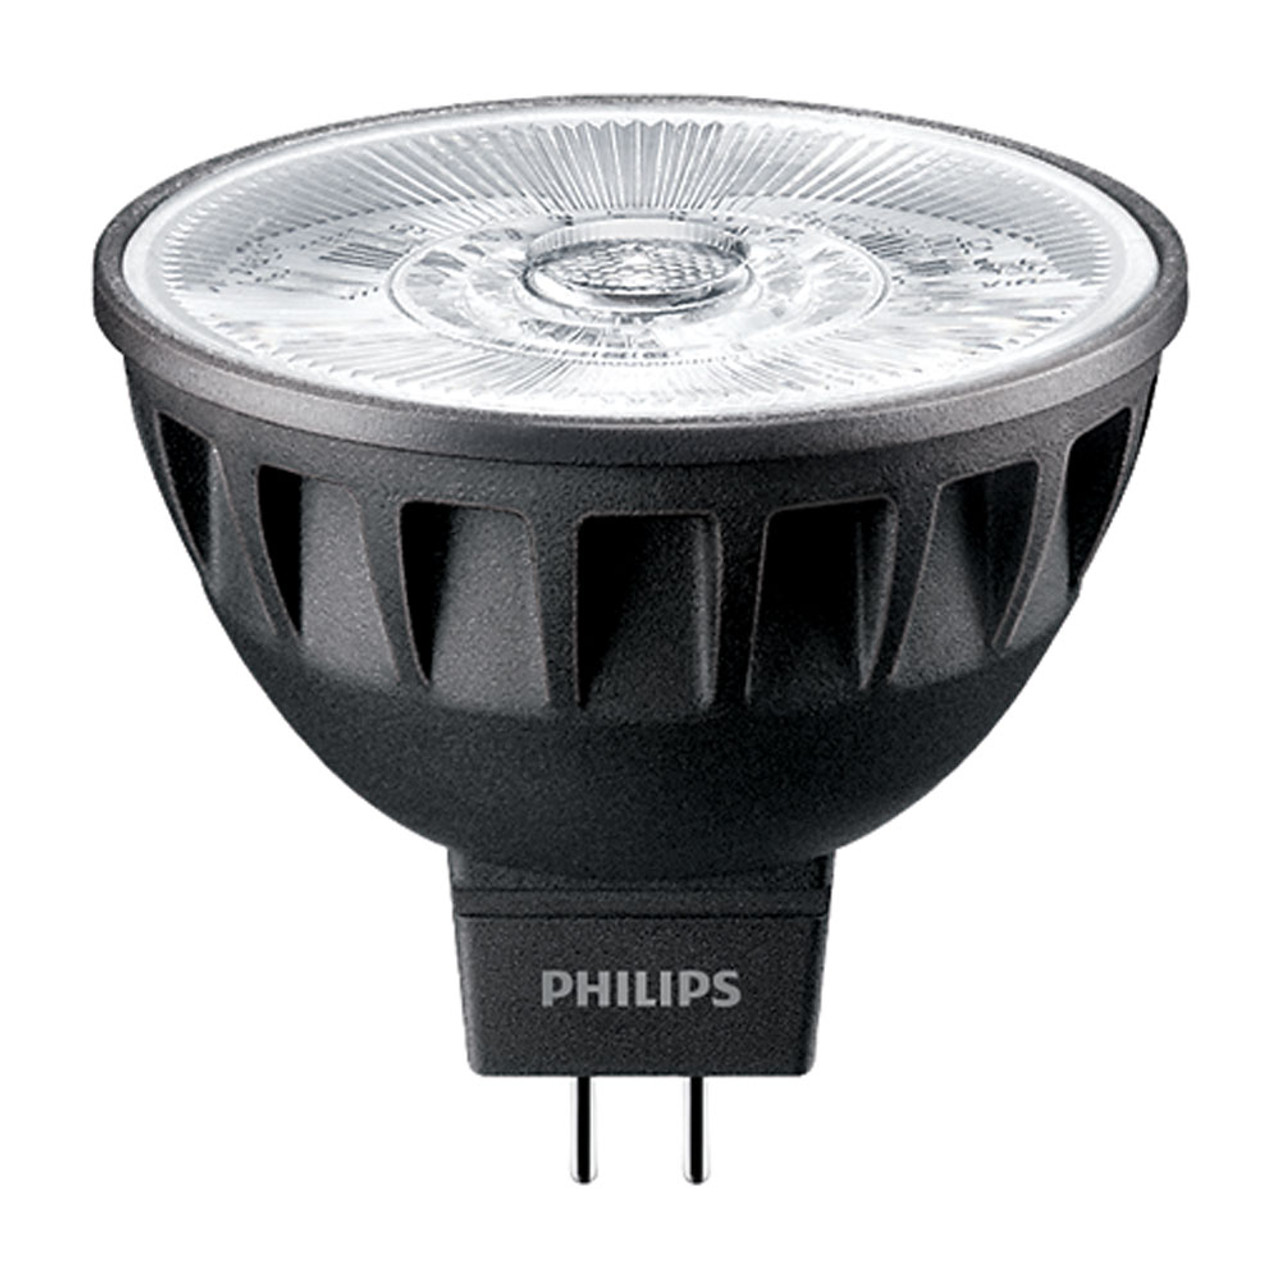 Philips Master LED 12V 6.7W (35W) Warm White 24 Degrees Dimmable RA97